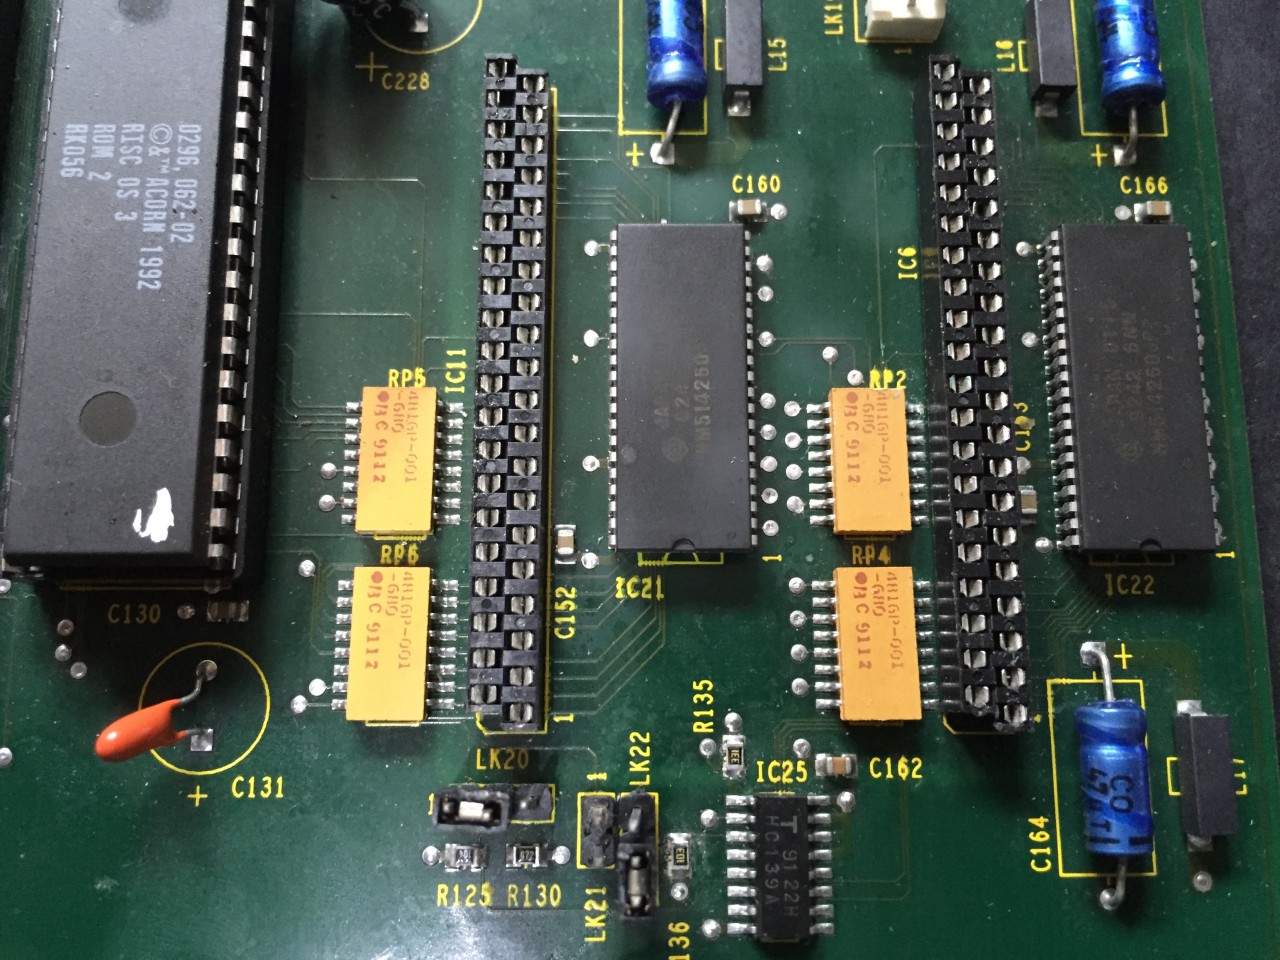 The A3010 Memory and Expansion Sockets